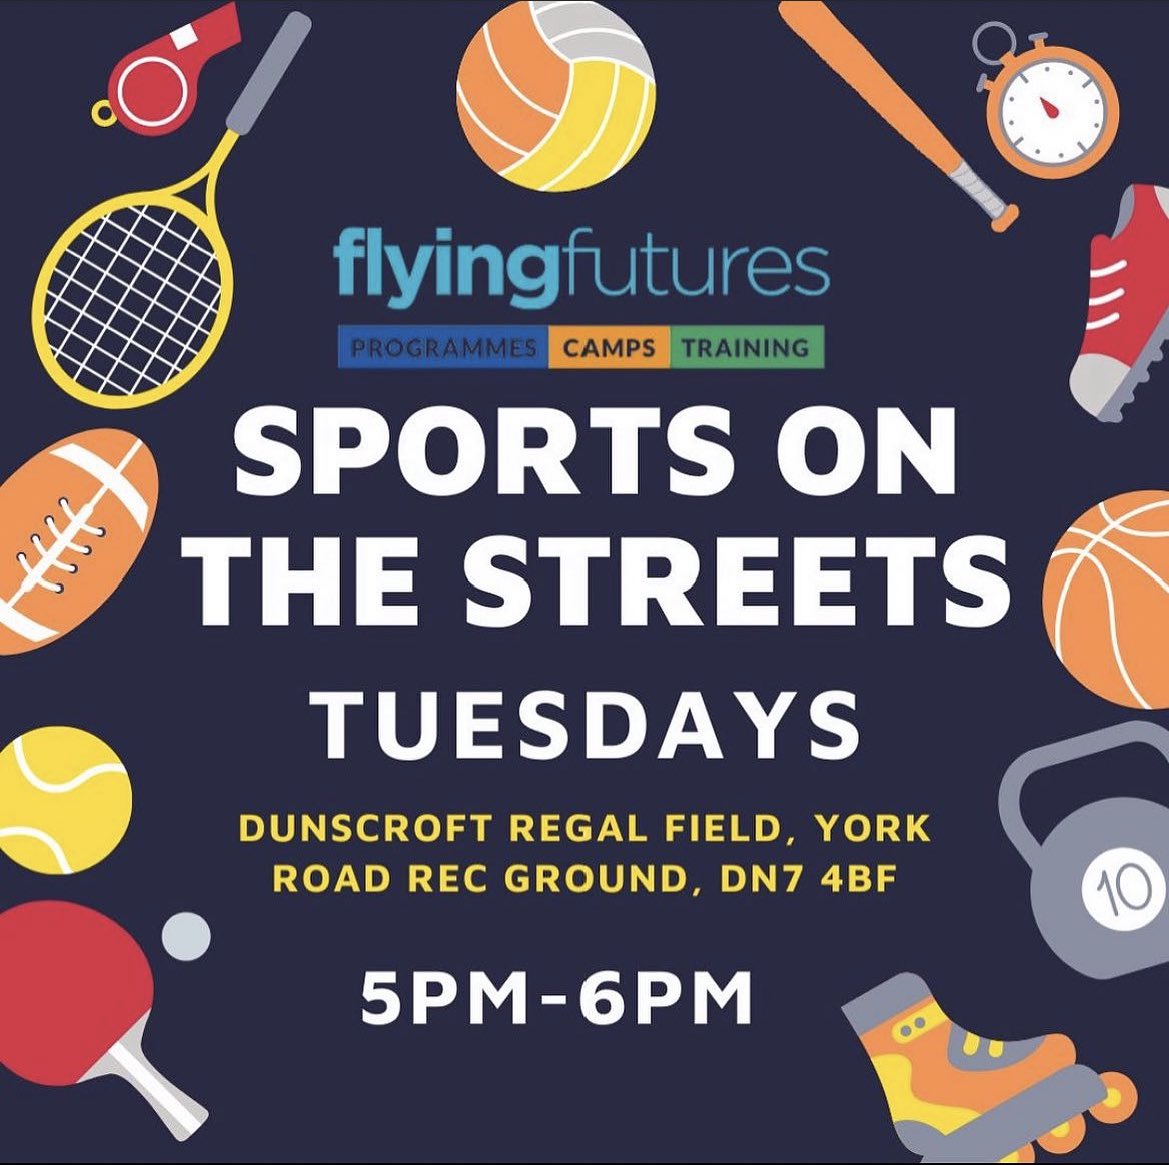 Sports on the Streets! FREE sports clubs, no need to book, just turn up. Tonight (Tuesdays) in Dunscroft, Dunscroft Regal field, York Road Rec Ground, DN7 4BF Tuesdays: 5:00-6:00pm #flyingfutures #sports #sportsonthestreets #free #youthwork #dunscroft